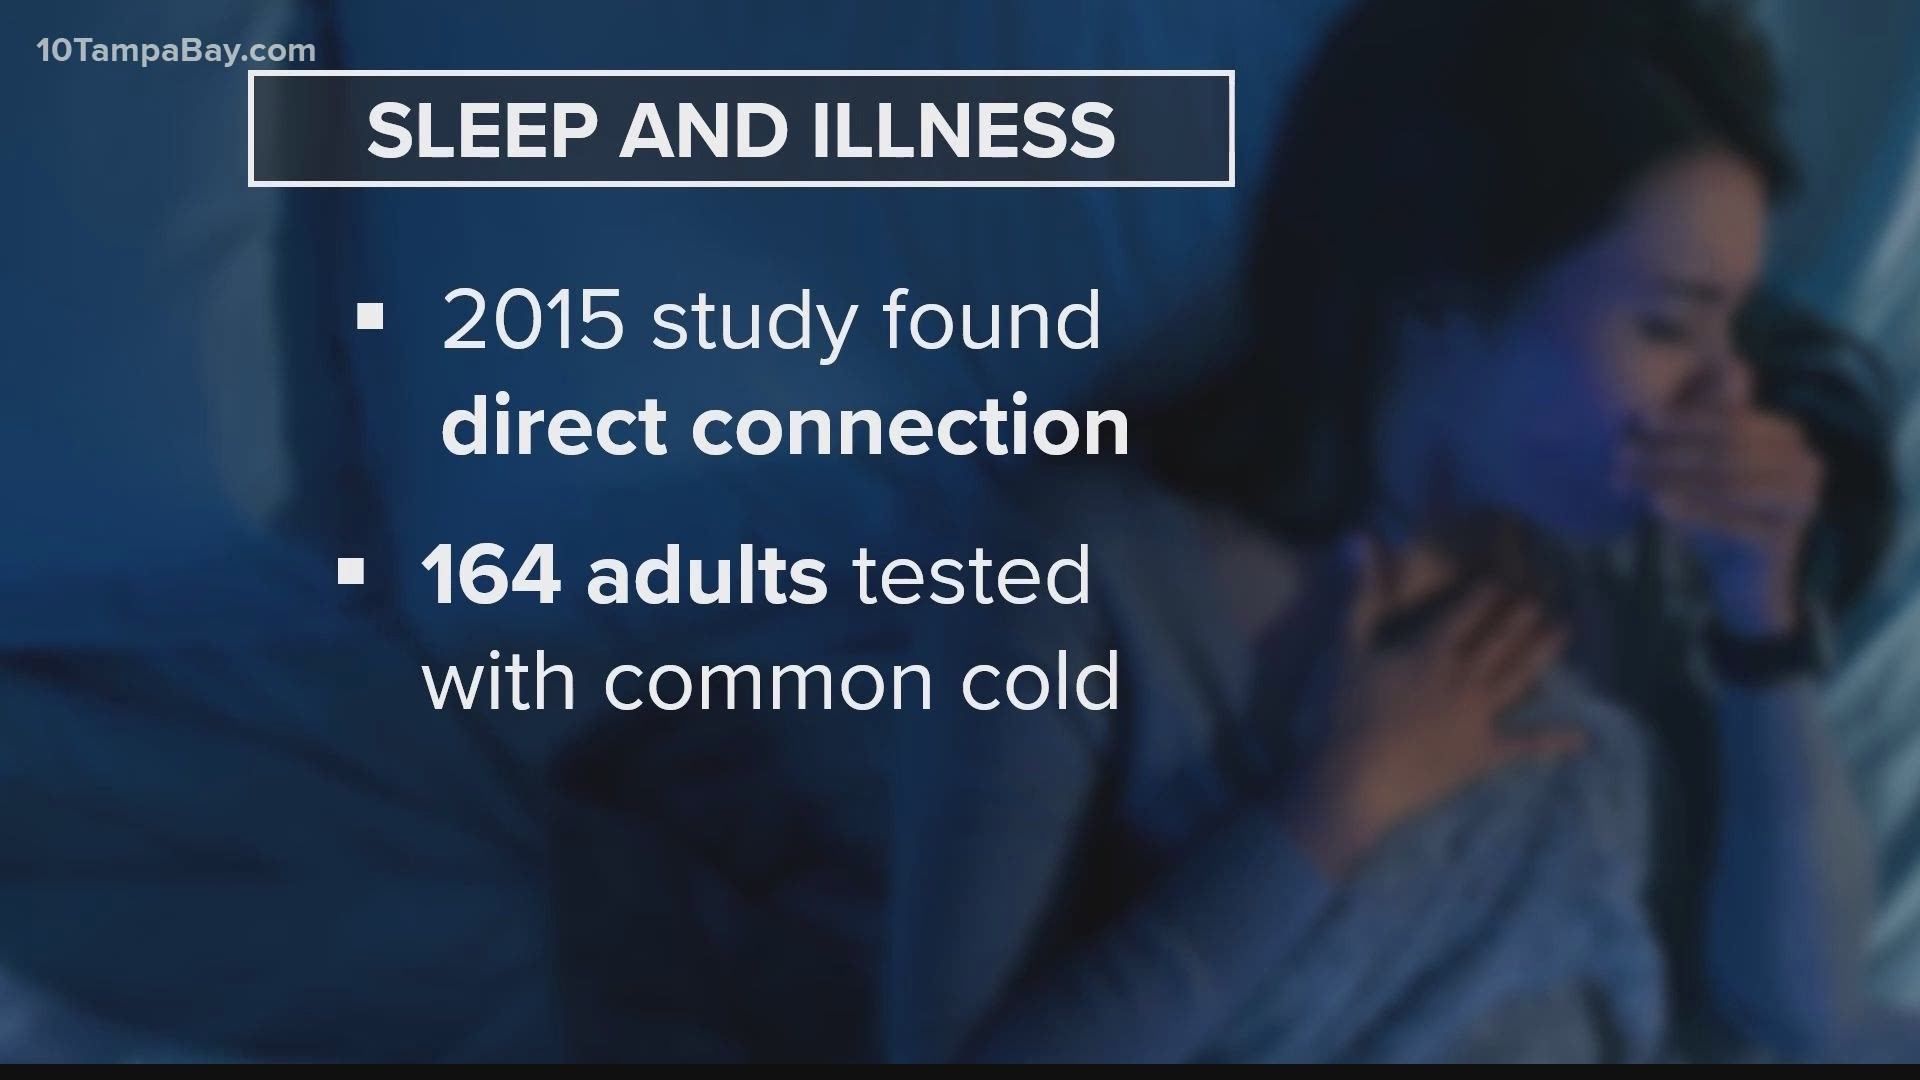 Numerous studies show a direct link between sleep deprivation and illness.